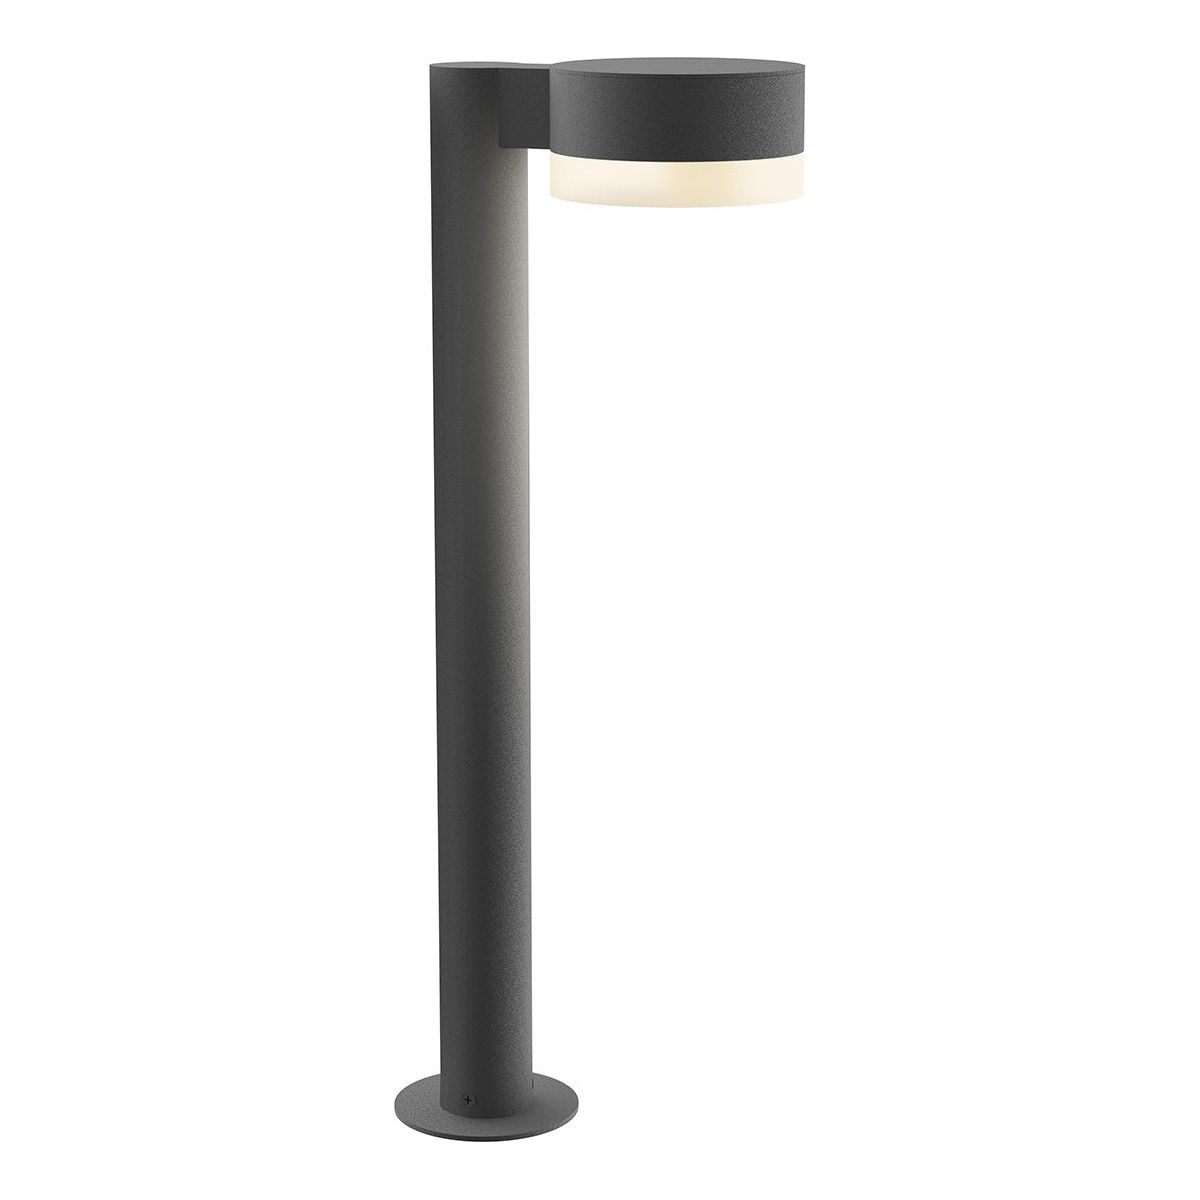 REALS 22" LED Bollard with Plate Cap and Cylinder Lens